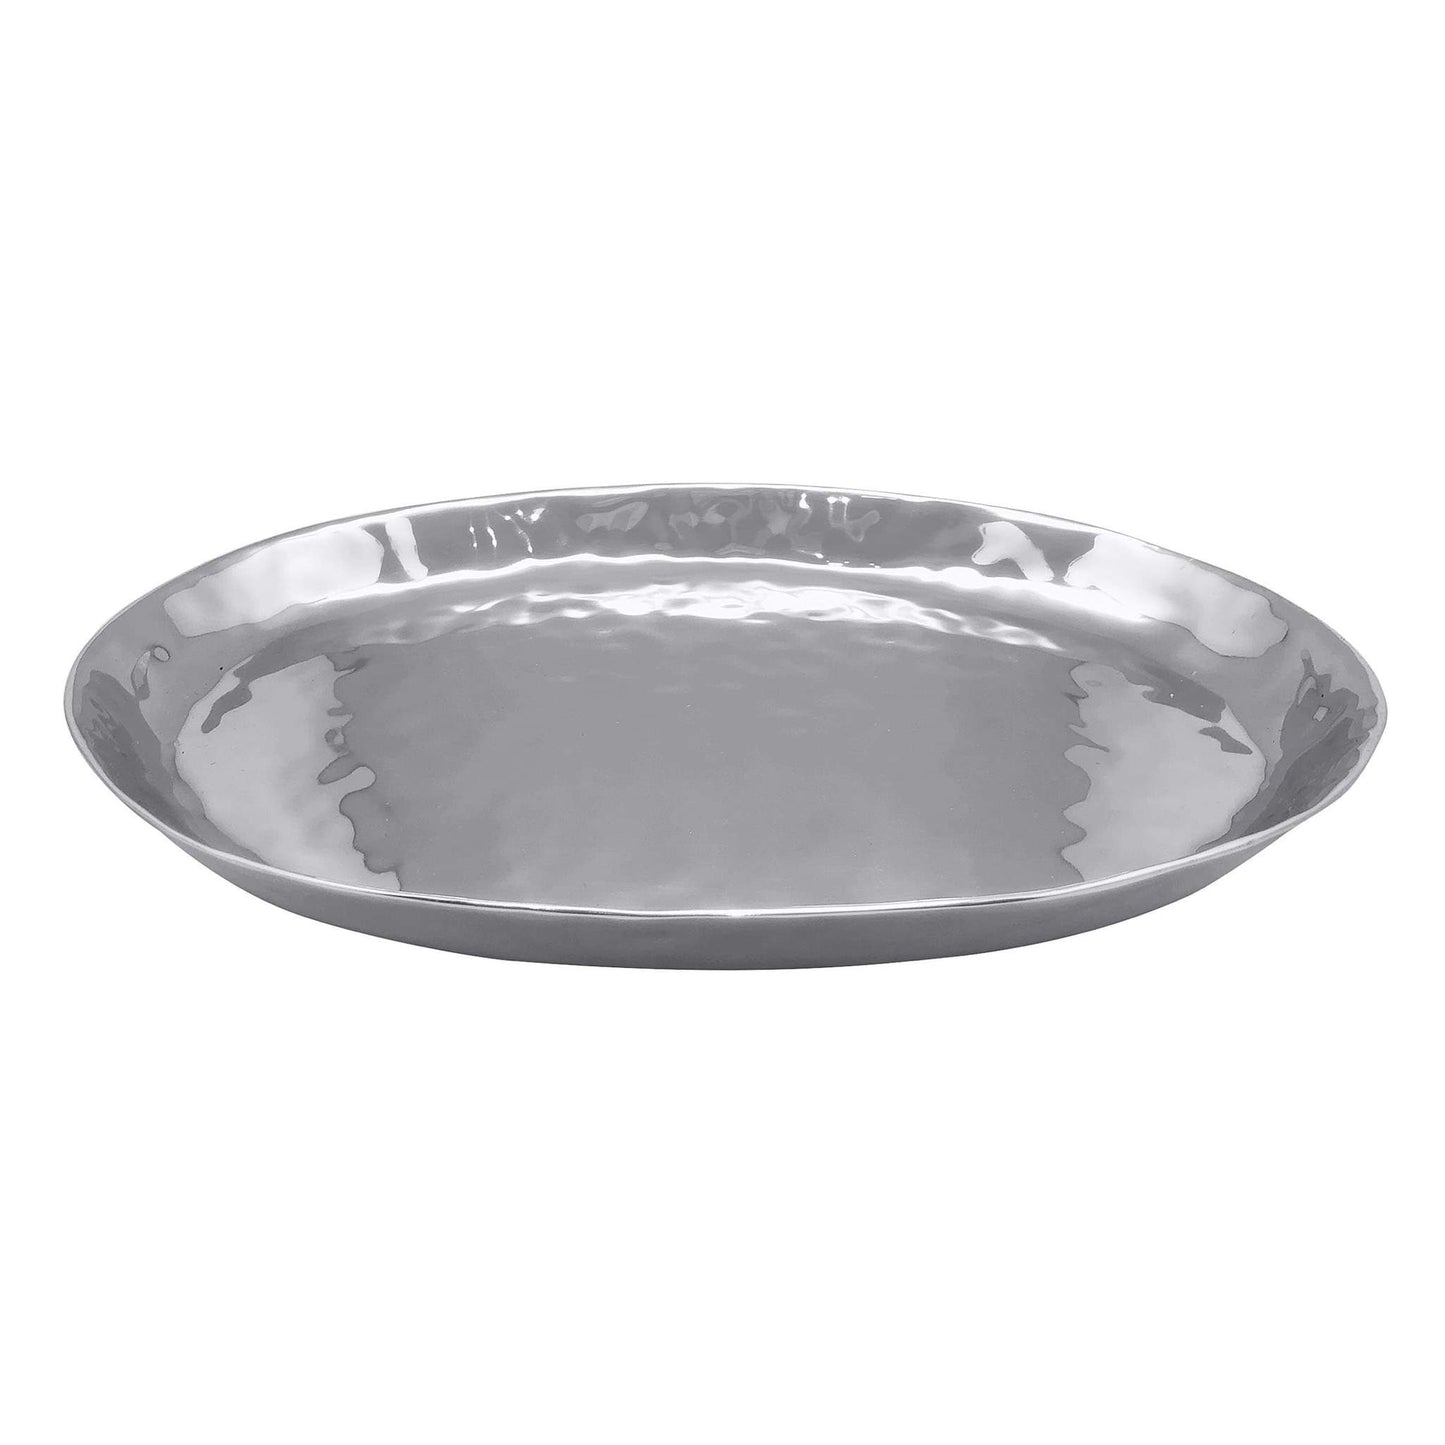 Mariposa Shimmer Large Oval Tray 4601